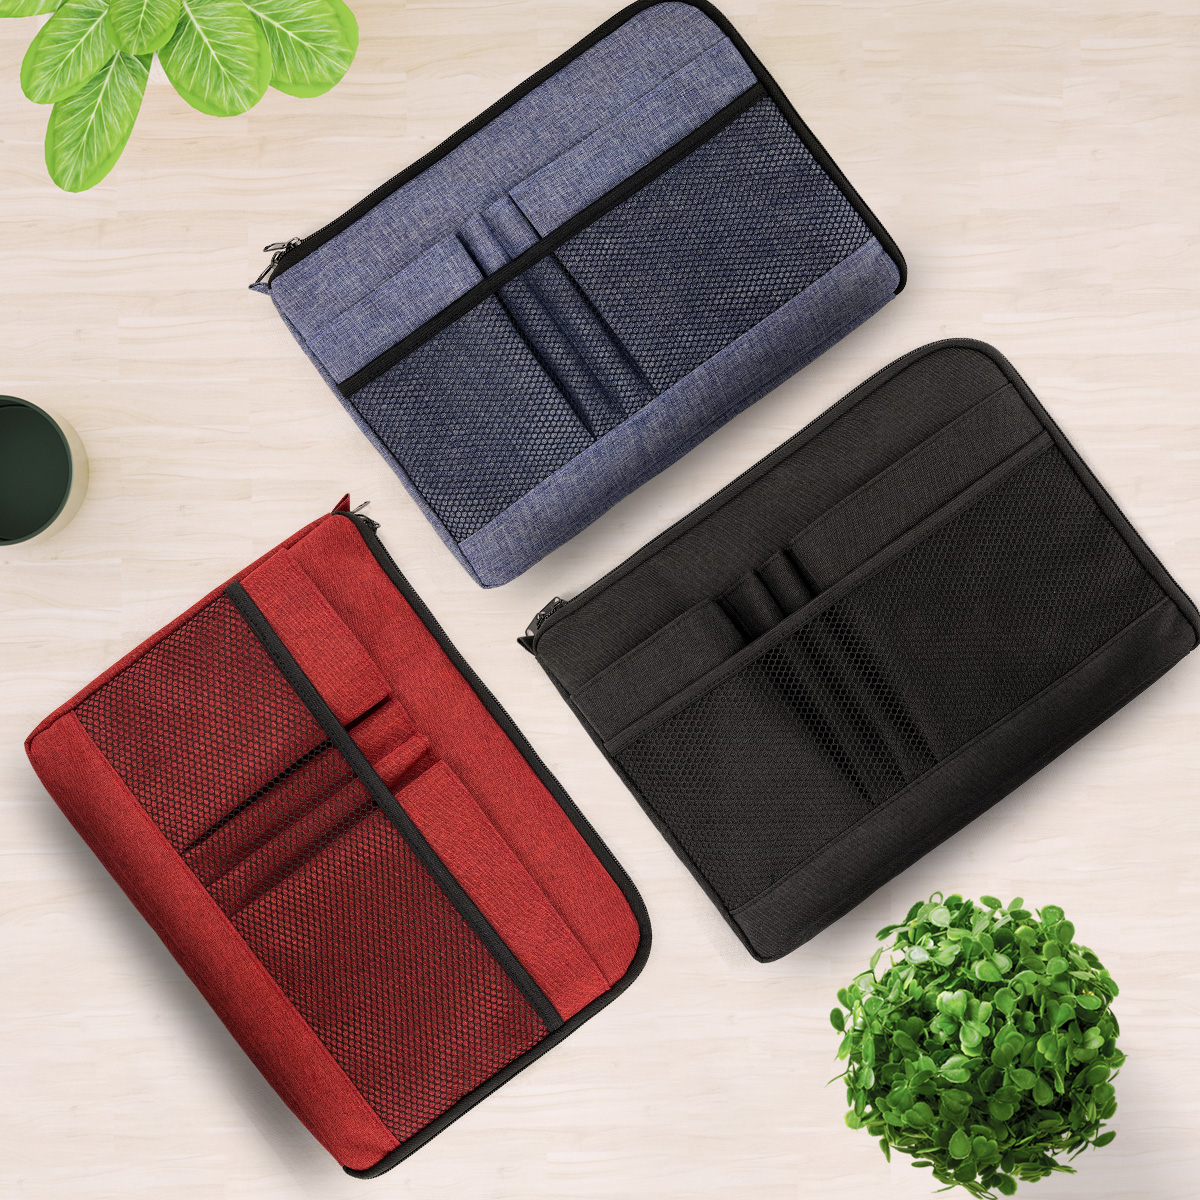 Safe Document Storage bag with Two-Way Zipper Multi Pockets Home Office Filing Ipad Organizer for A4 Document Holder Cash Paper Phone Pens